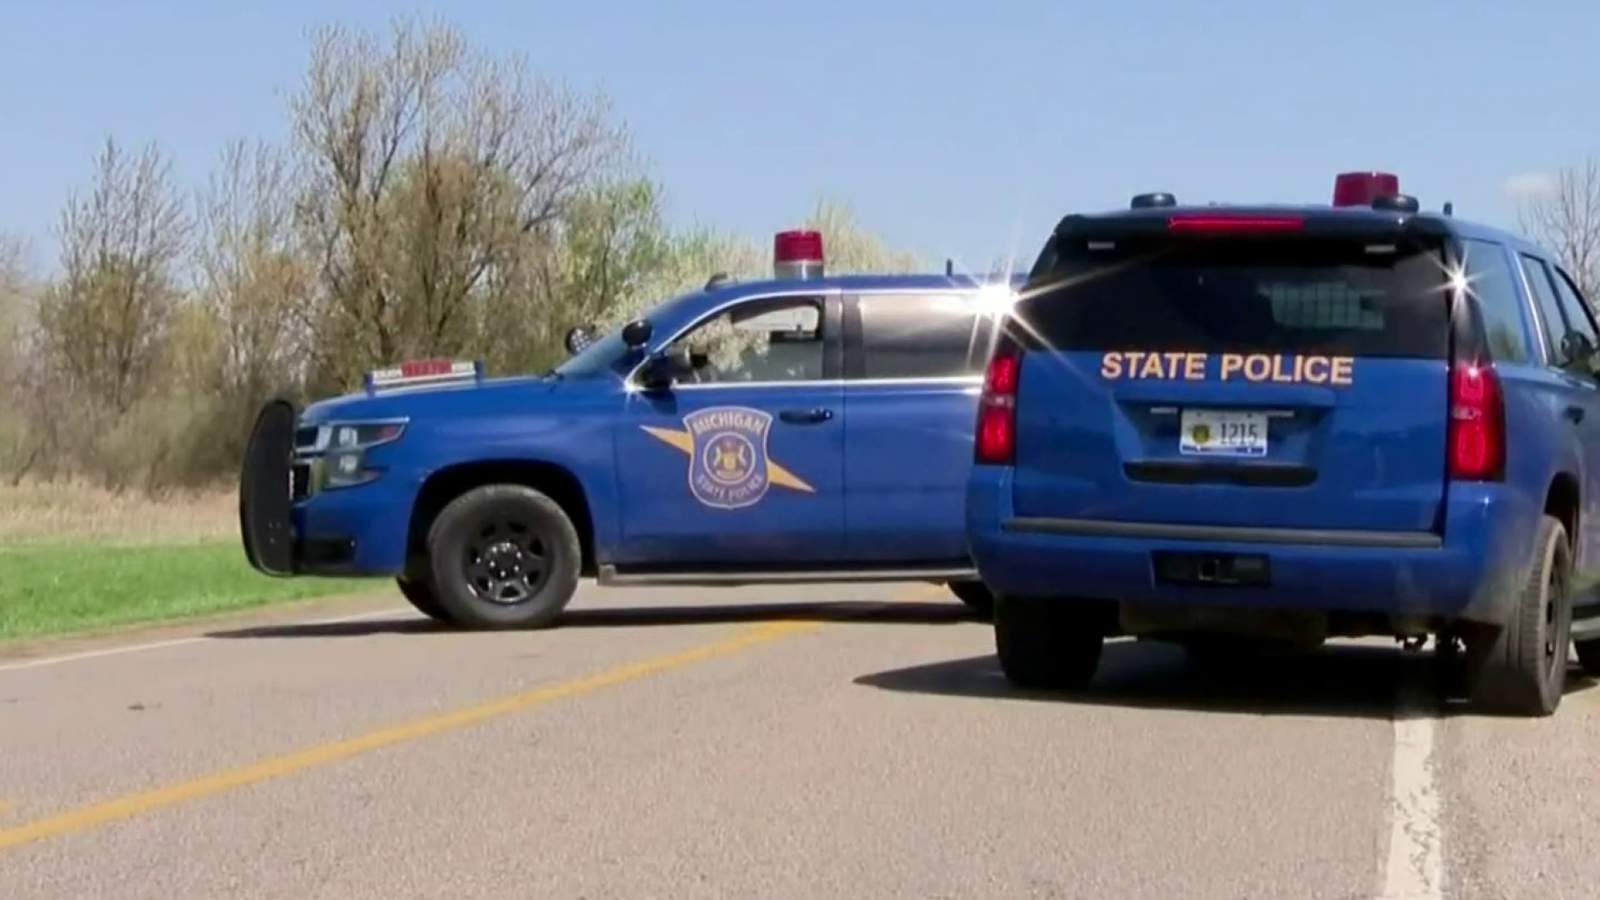 State Police trooper shoots man in Howell amid stolen vehicle investigation